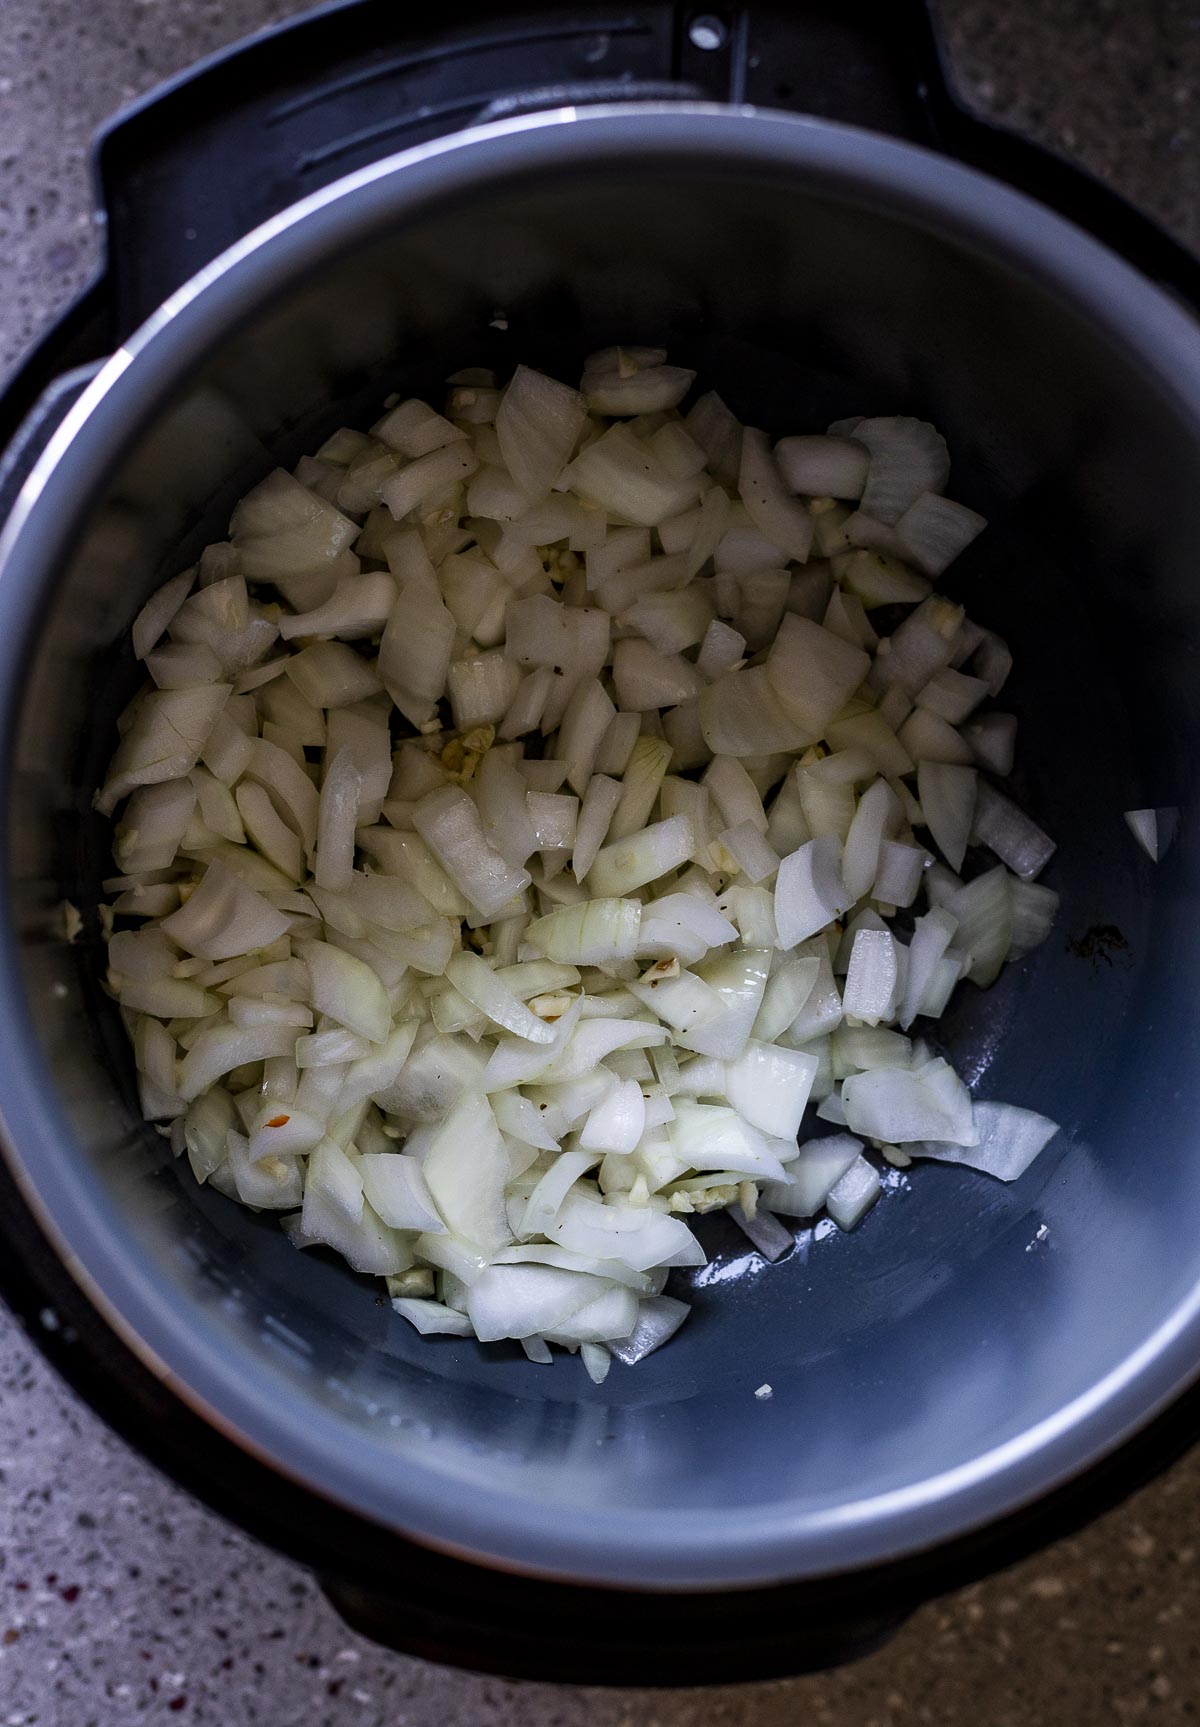 Chopped onions and garlic added to the Instant Pot.